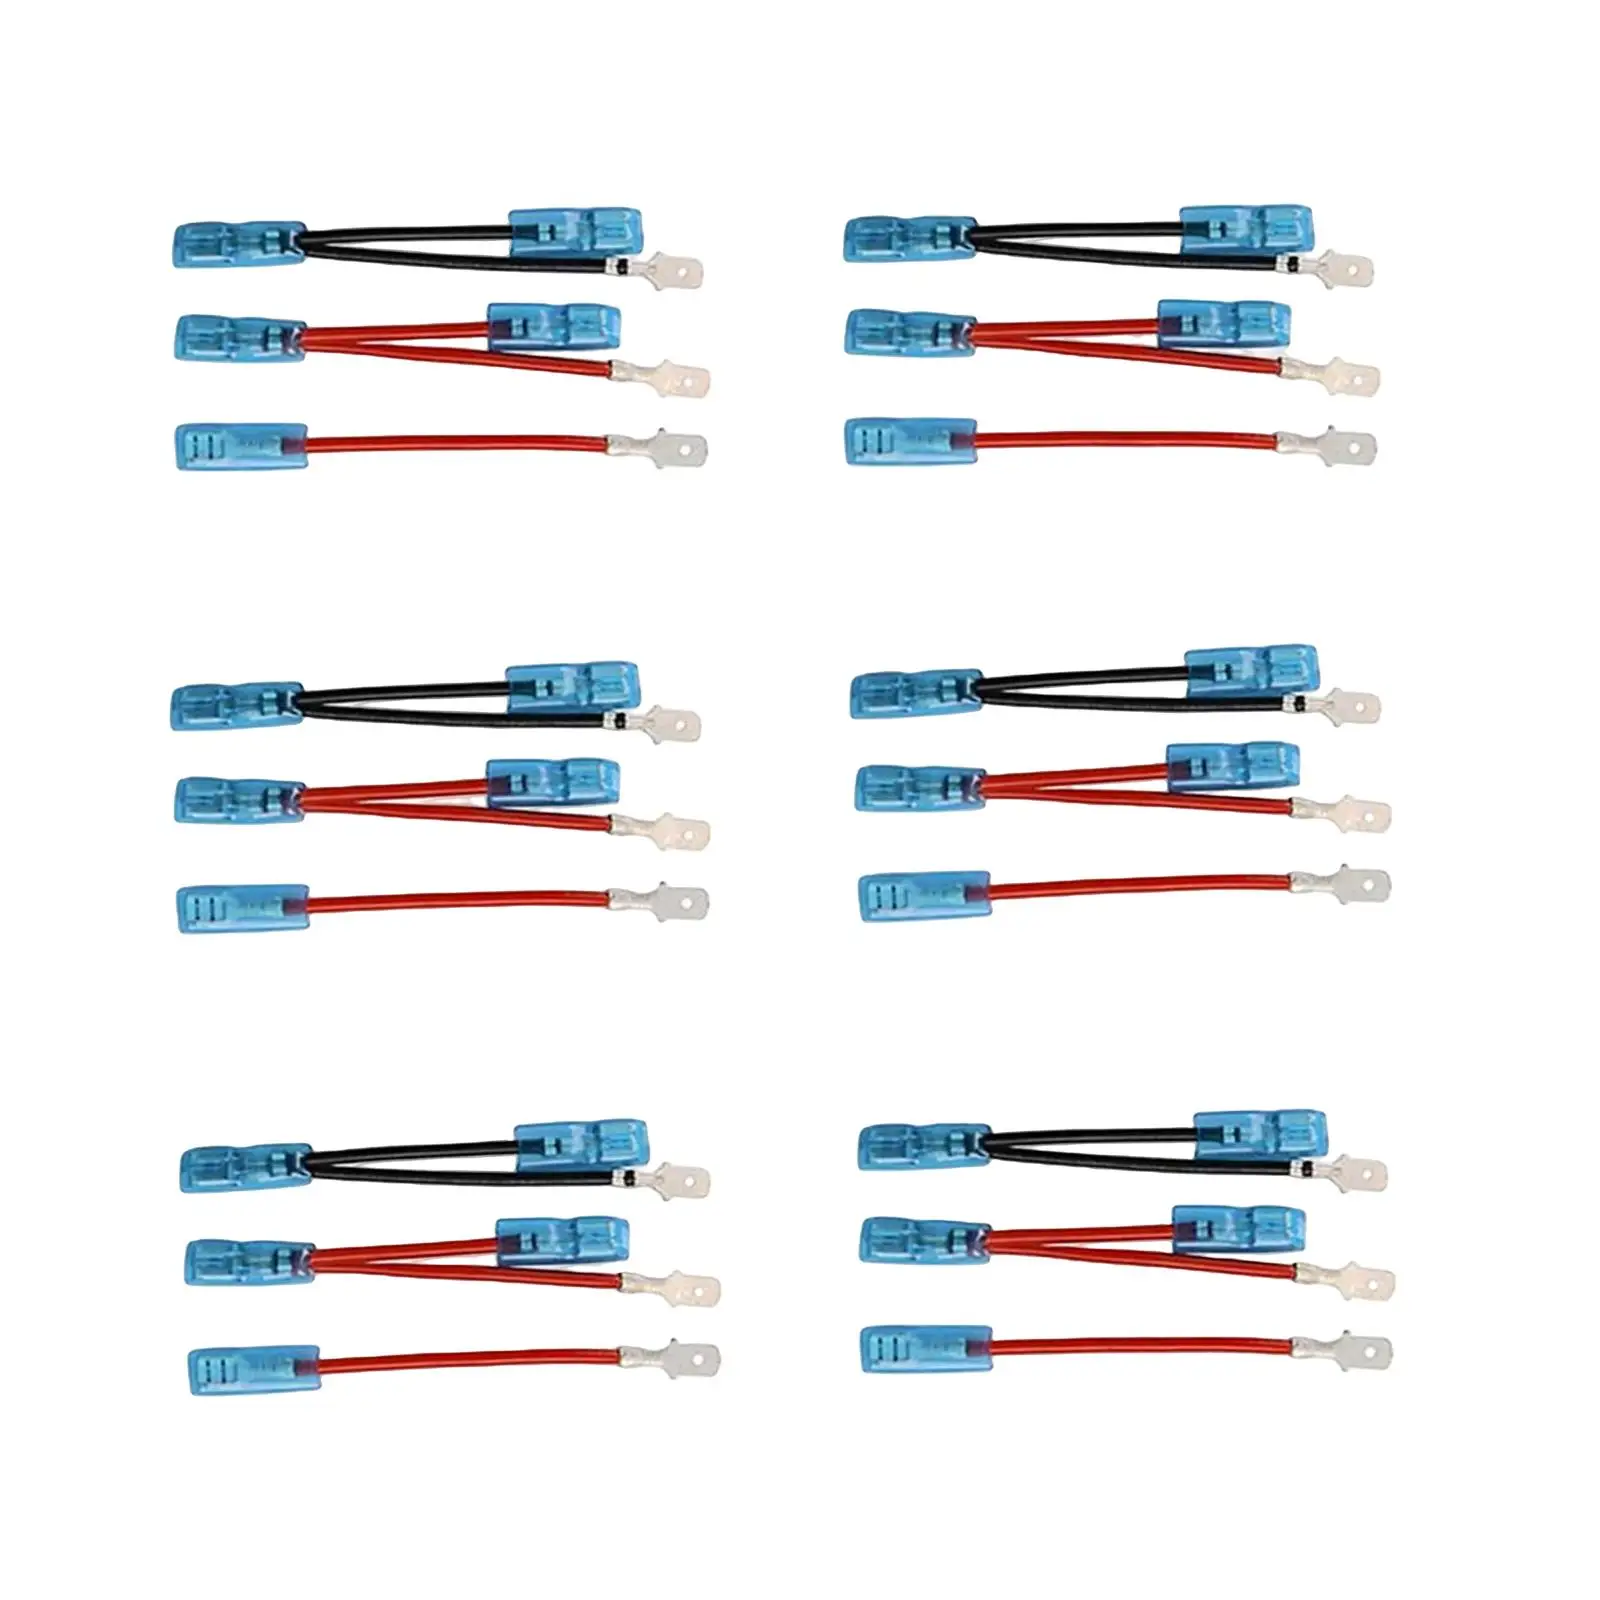 6 Pieces 5 Pin Rocker Switch Jumper Wires Set On Off Rocker Switch Wiring Accessory Durable Portable for UTV Train Marine